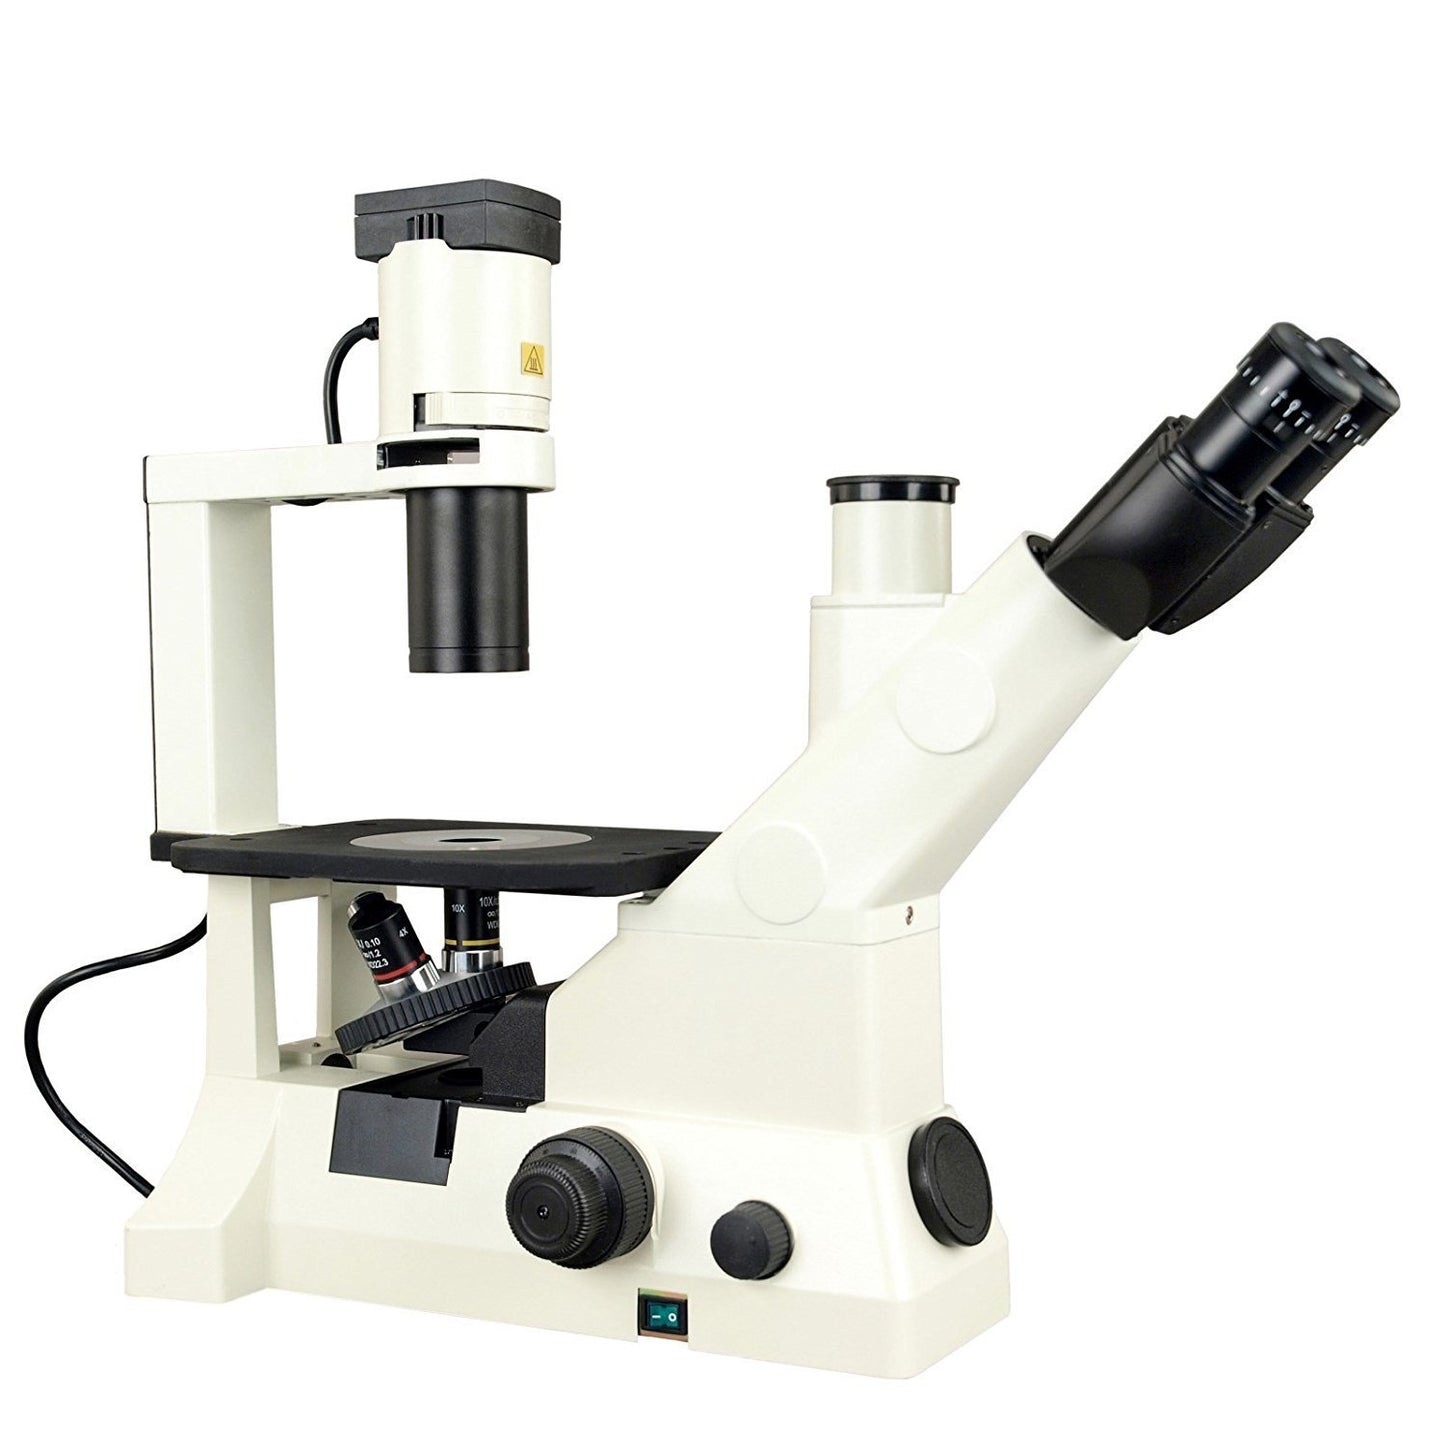 OMAX 40X-400X Inverted Phase Contrast Infinity PLAN Trinocular Biological Microscope